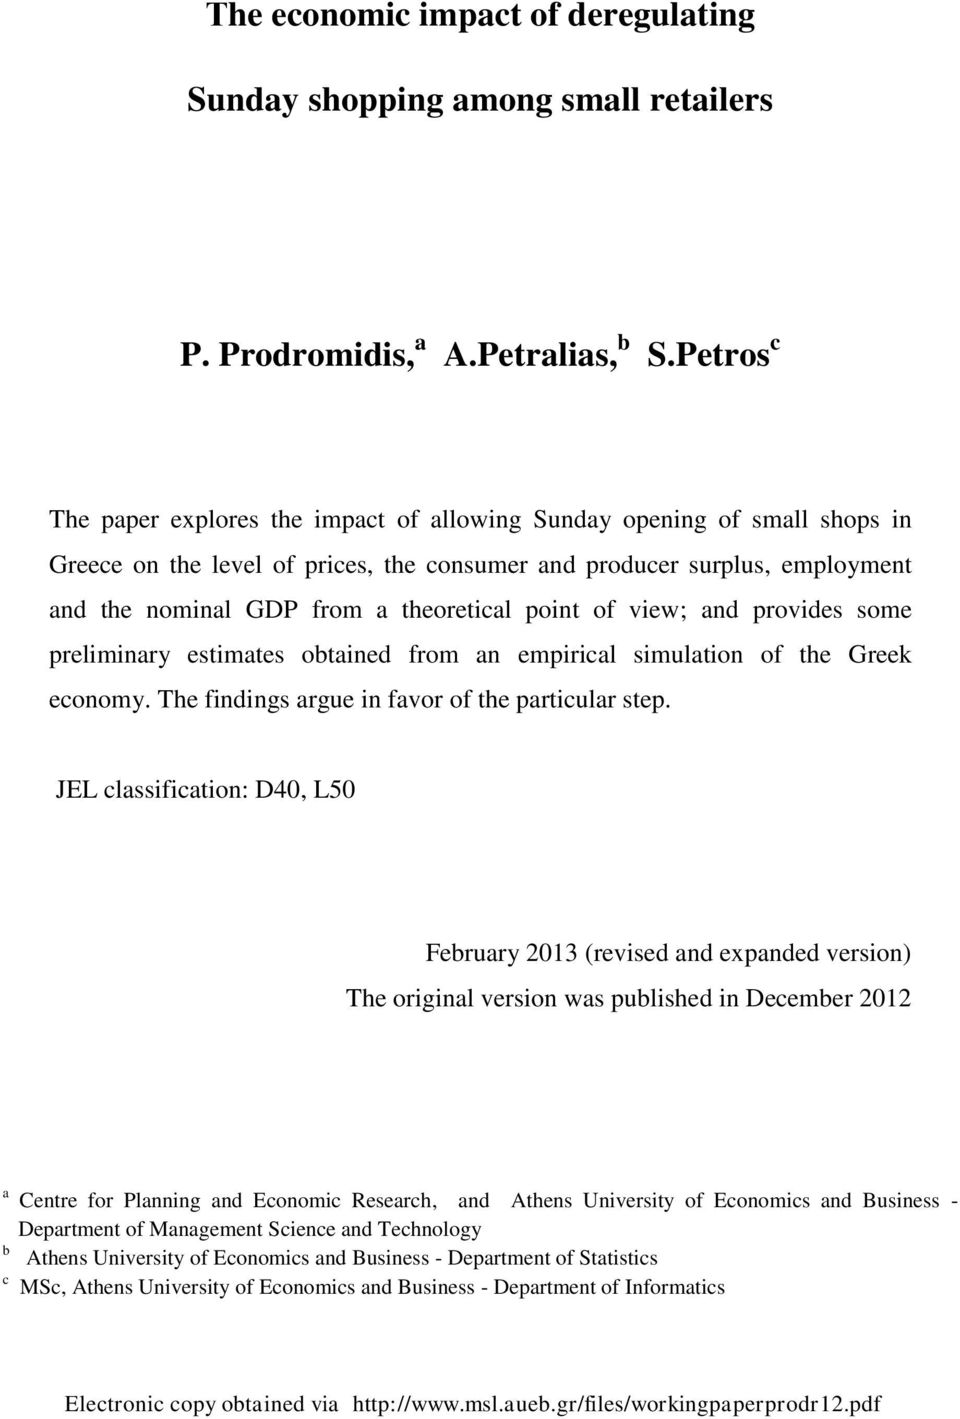 point of view; and provides some preliminary estimates obtained from an empirical simulation of the Greek economy. The findings argue in favor of the particular step.